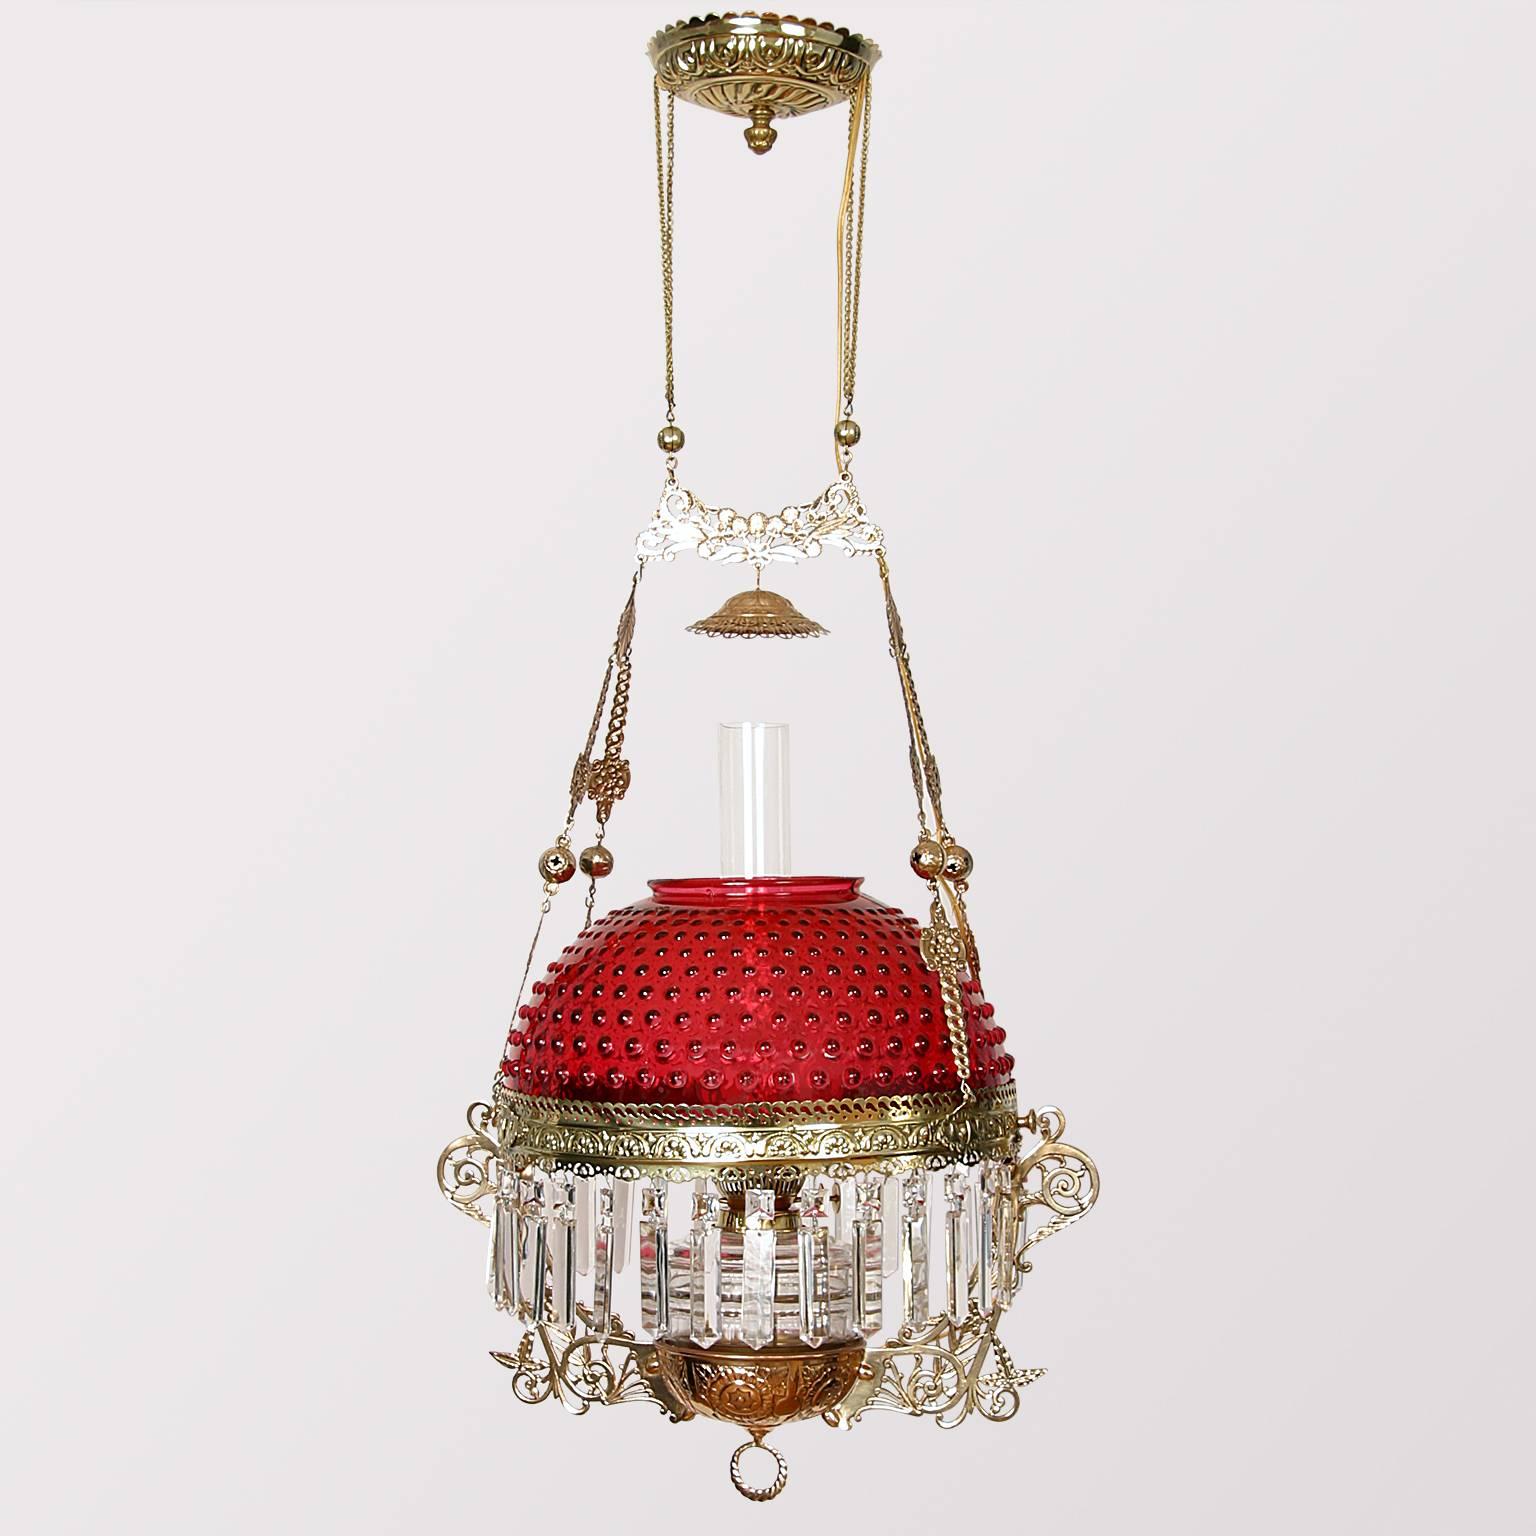 Beautiful, restored and electrified parlor lamp with Cranberry Hobnail, measure: 14inch glass shade and clear glass font.